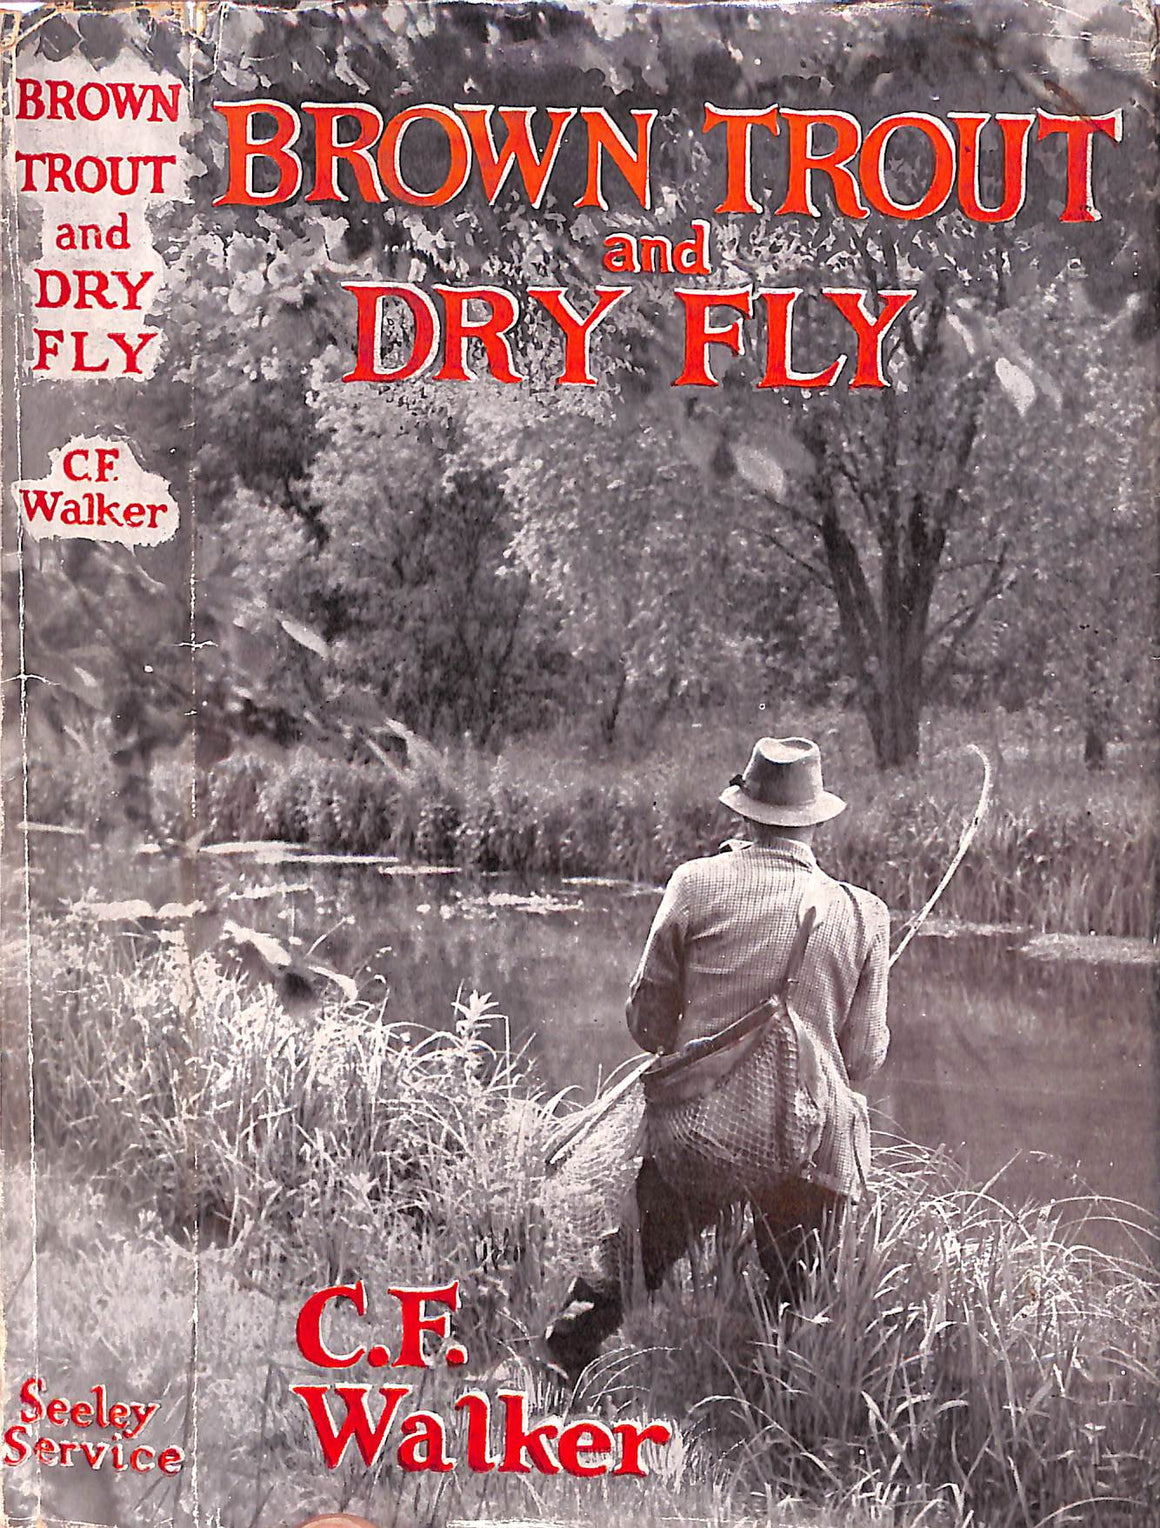 "Brown Trout And Dry Fly" 1955 WALKER, C. F.